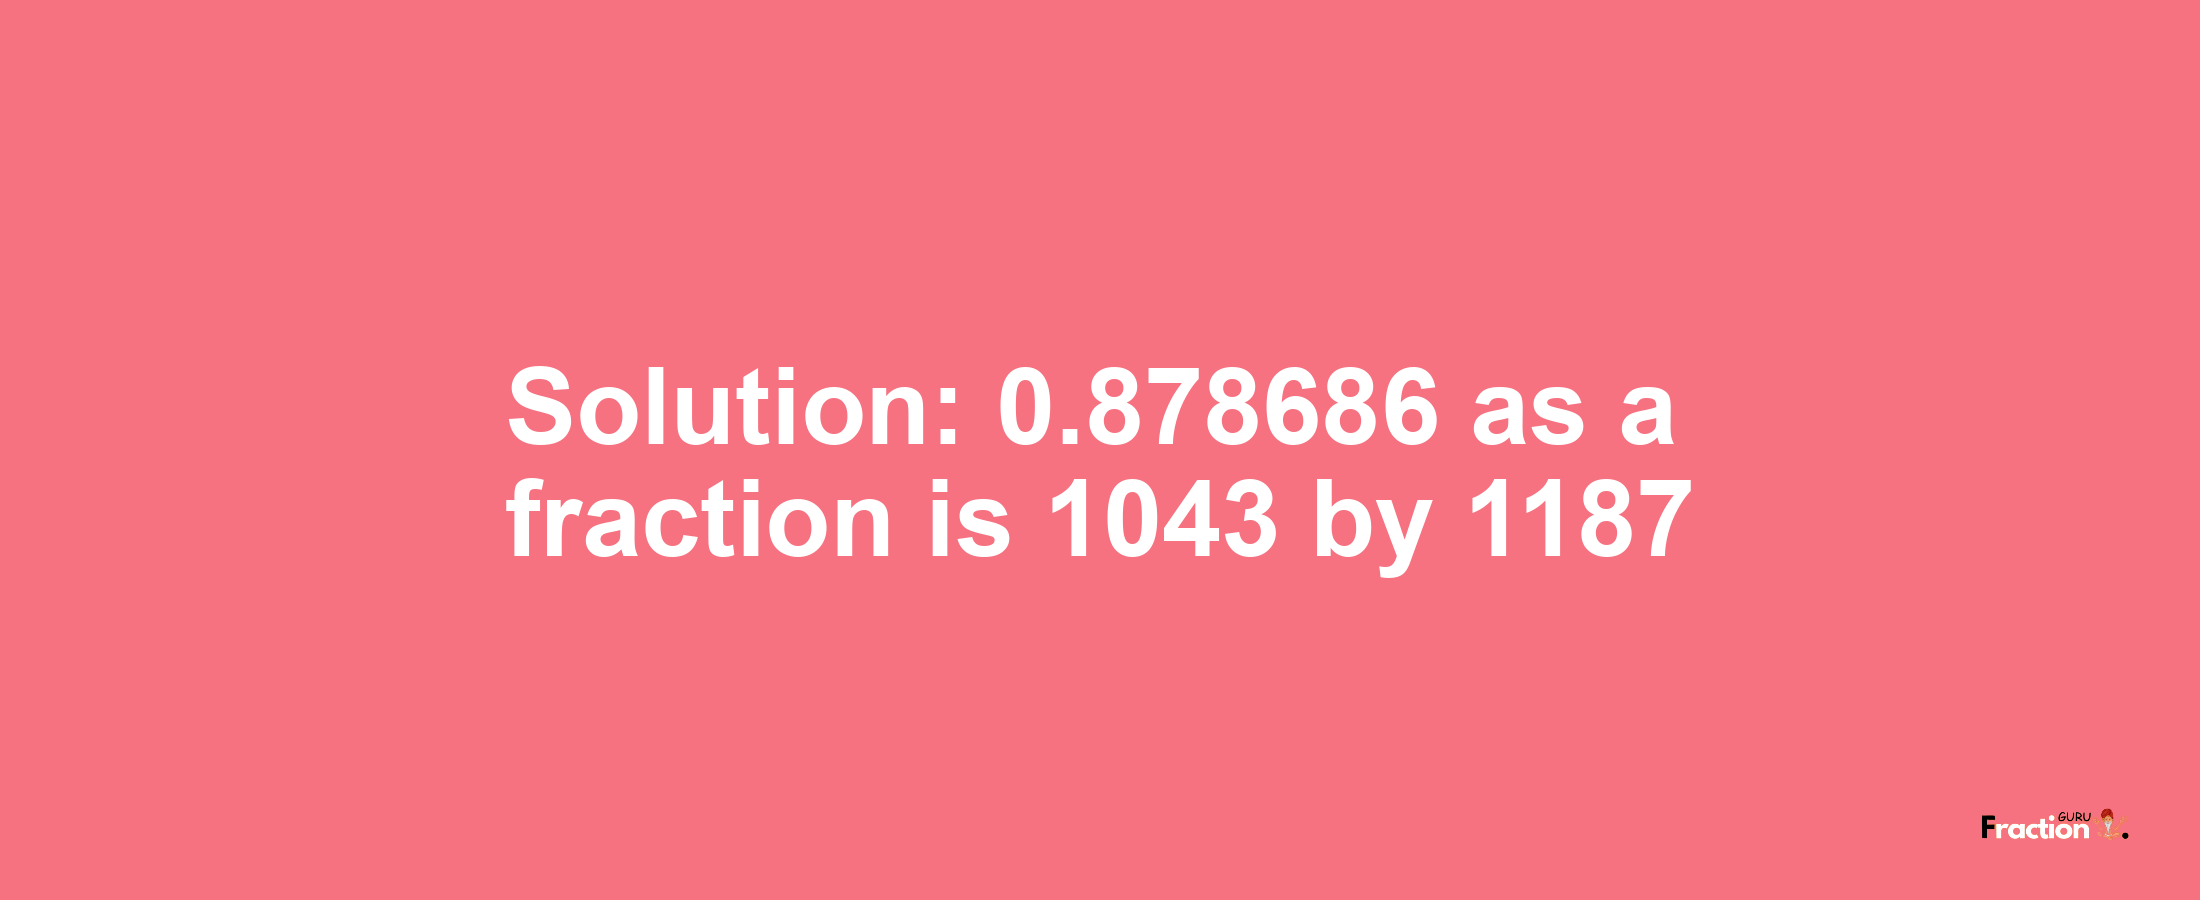 Solution:0.878686 as a fraction is 1043/1187